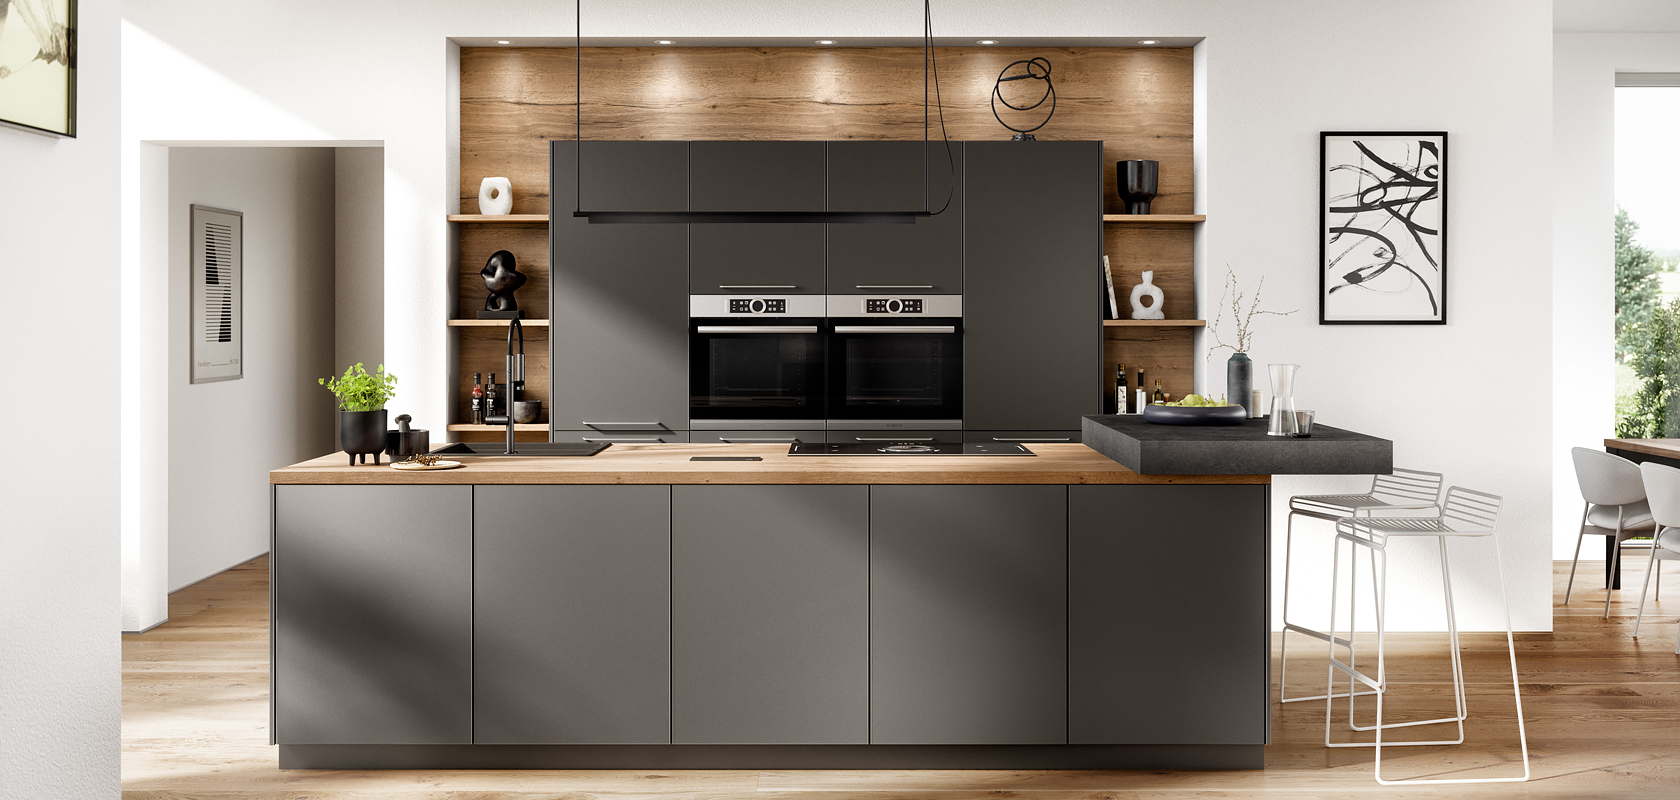 Modern kitchen interior with sleek dark cabinets, built-in appliances, and wooden accents, blending functionality with style in a bright, minimalist home design.